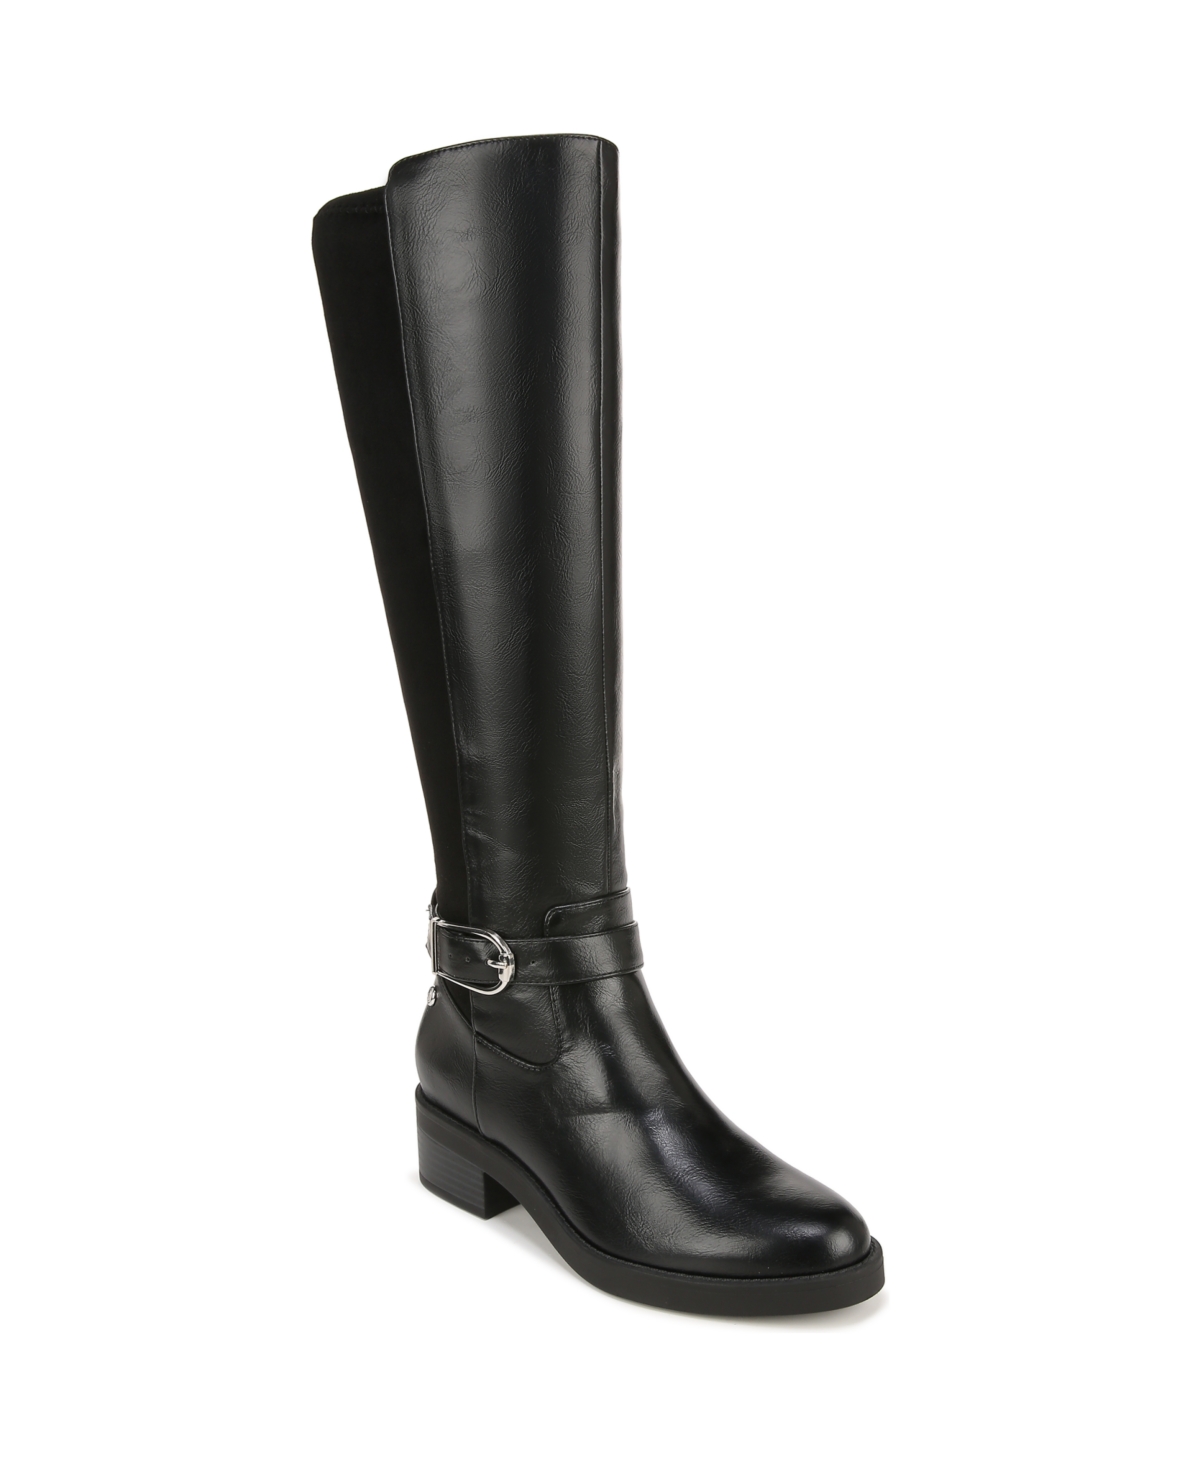 Brooks Wide Calf Knee High Boots - Black Faux Leather/Fabric